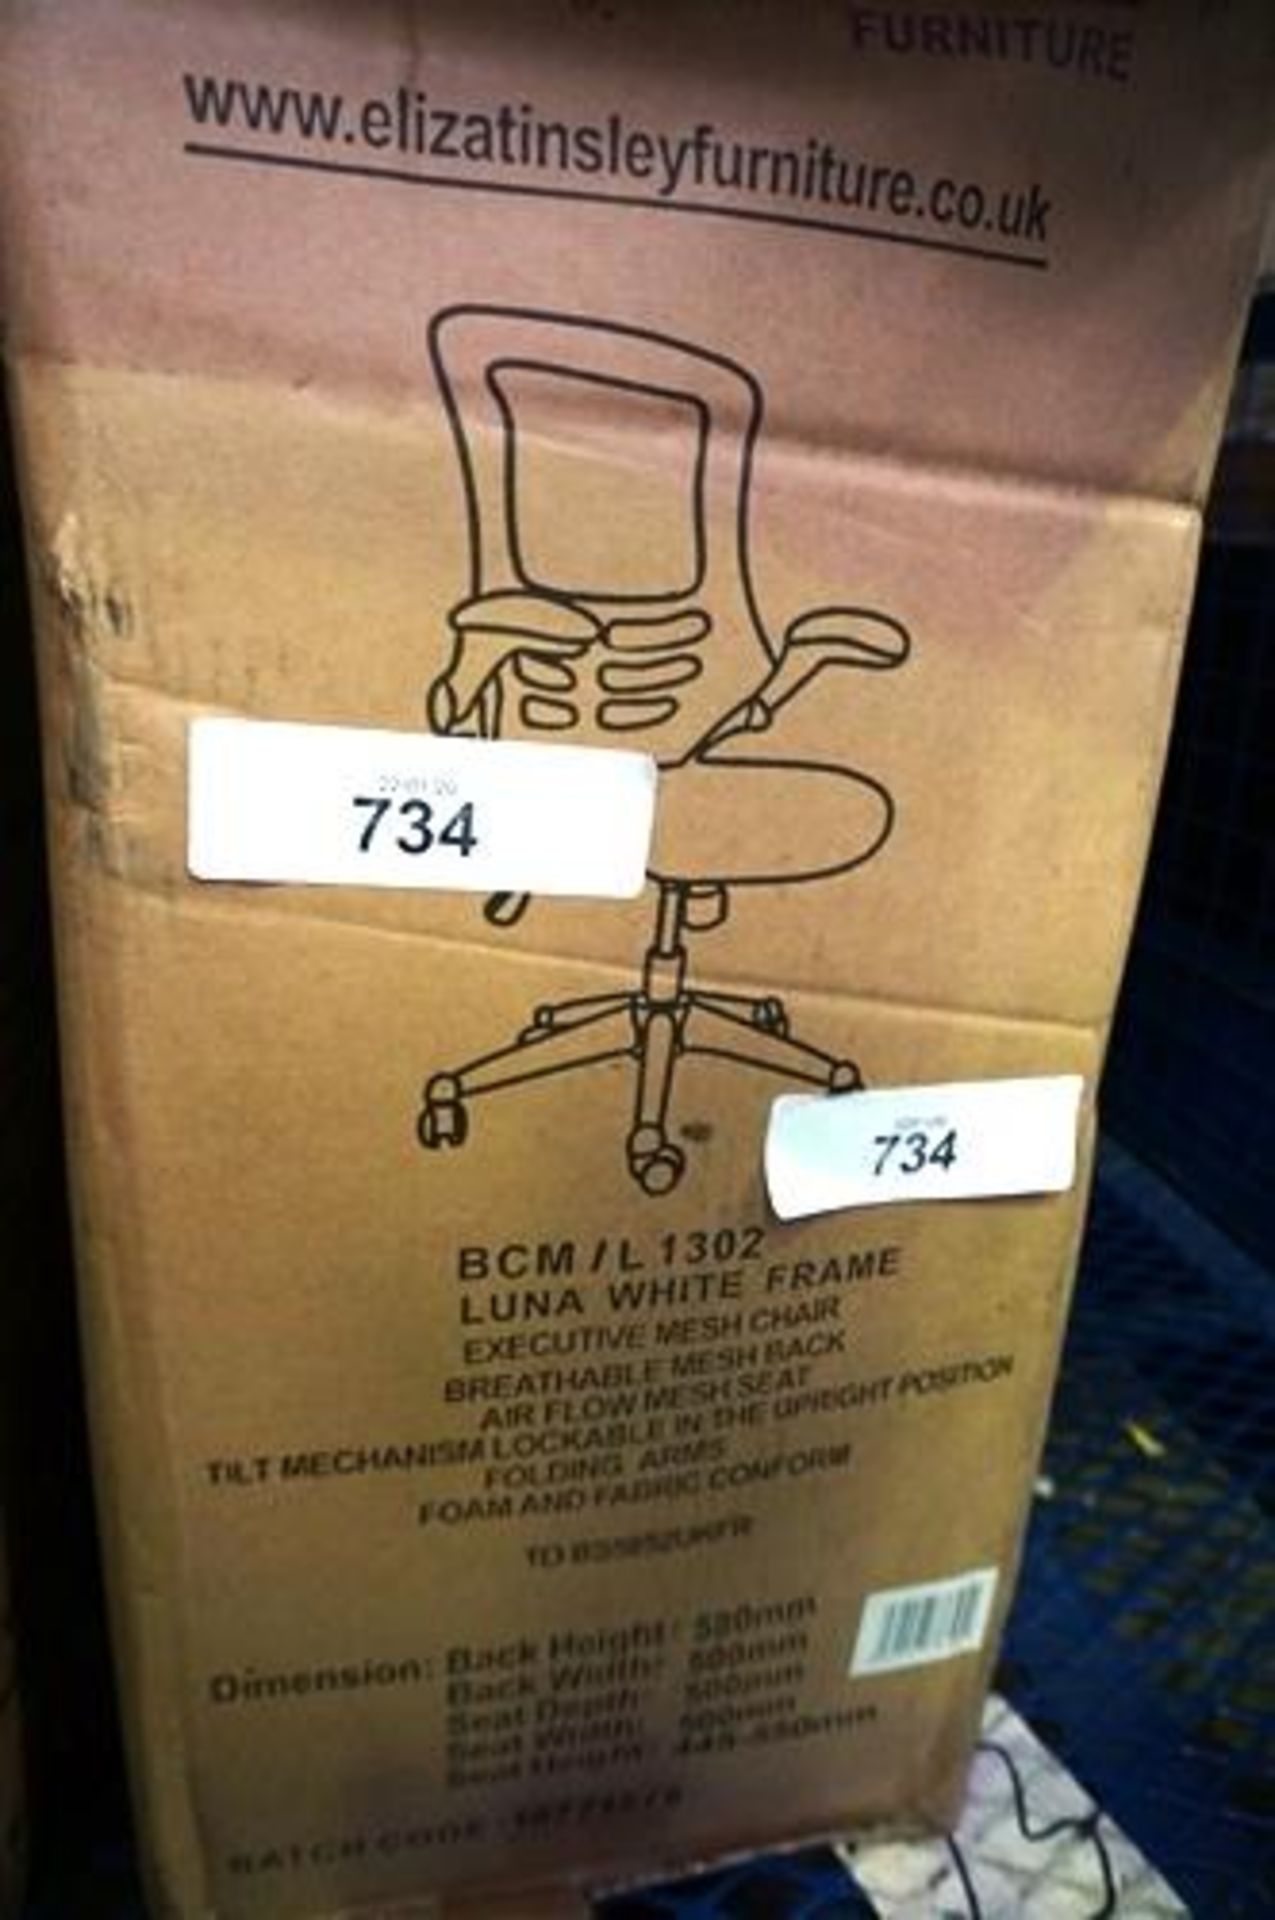 Eliza Tinsley luna white frame executive mesh office chair, code BCM/L1302 - New (GSF25)